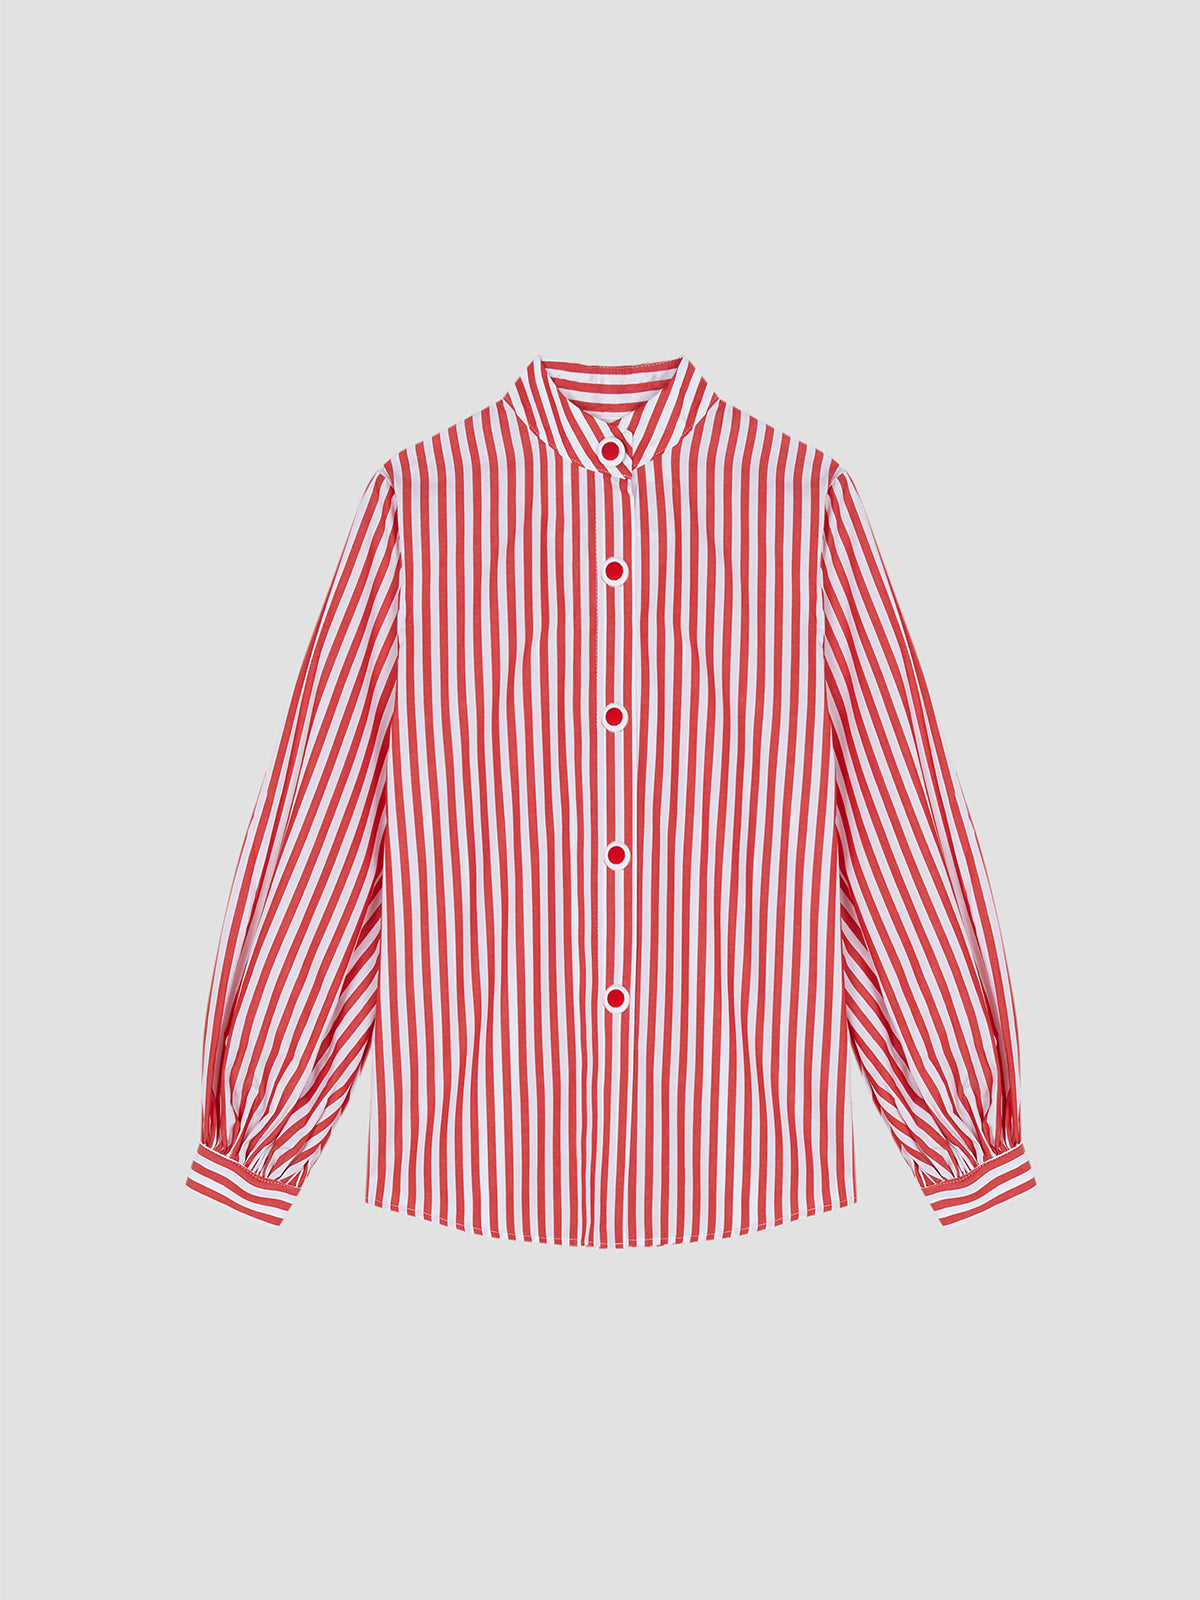 Shirt made in cotton with striped print in white and red